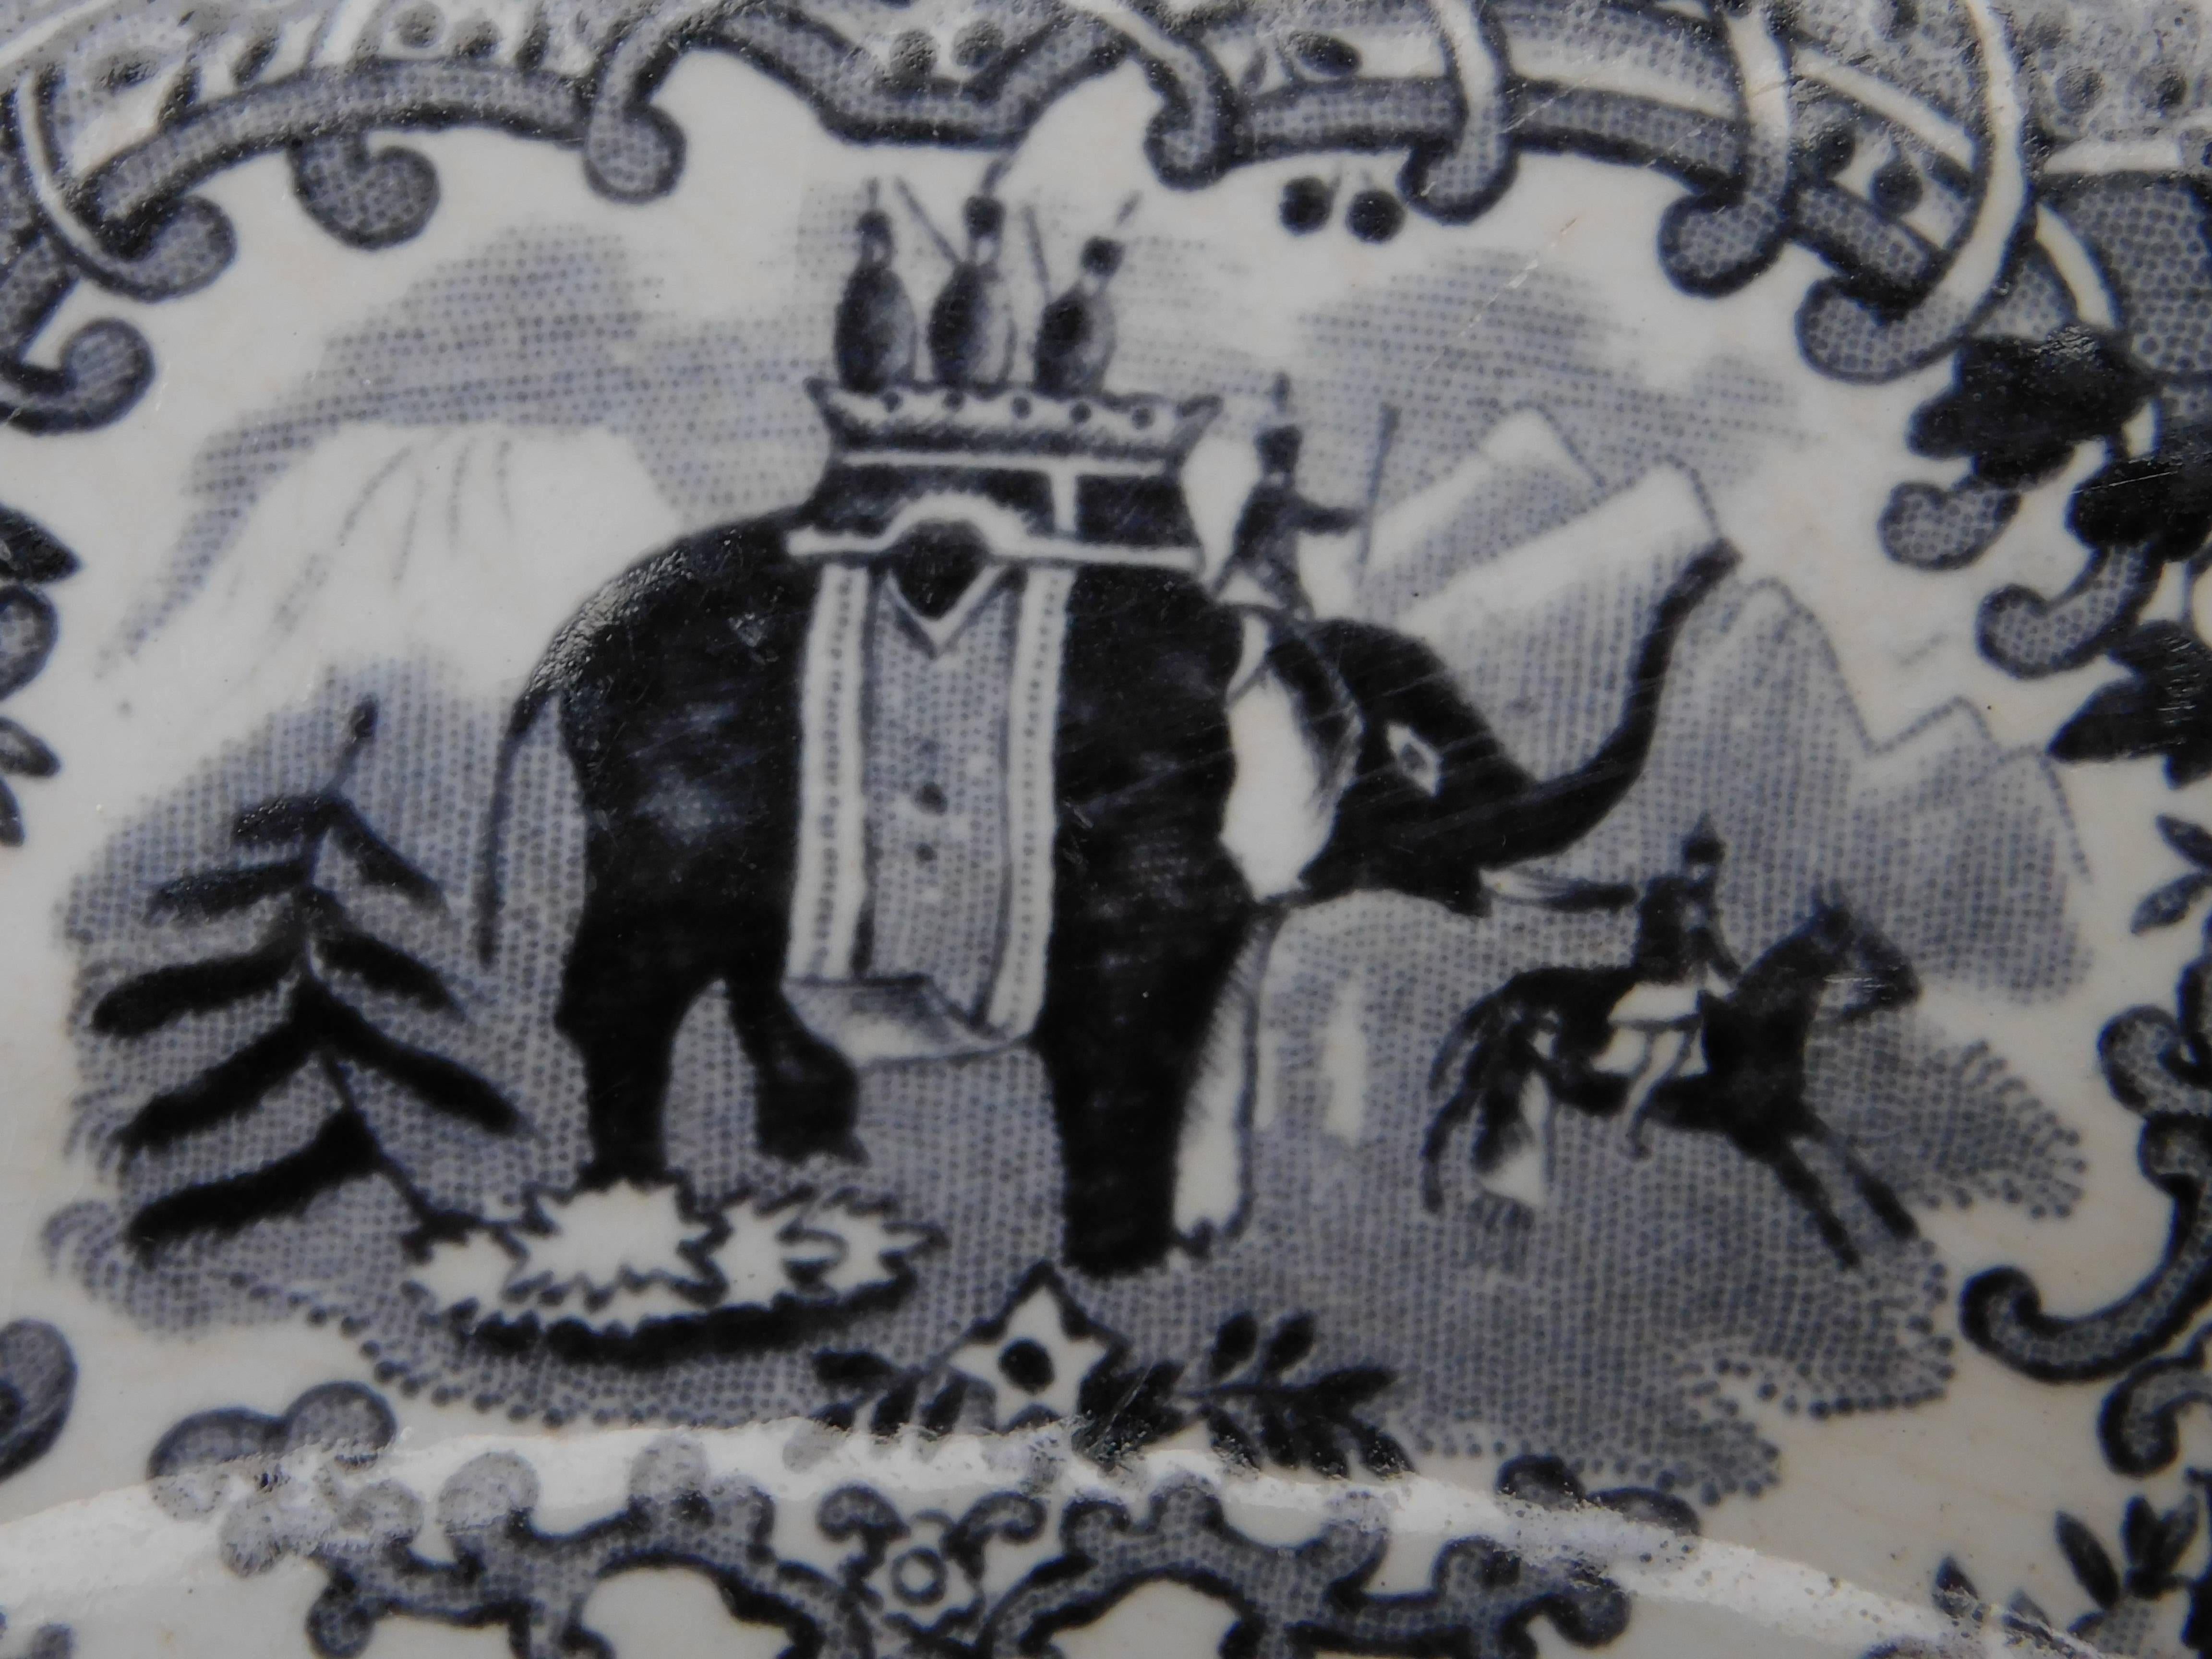 A pair of black and white Dutch transfer decorated plates depicting Hanibal's elephant army. Made at the turn of the 19th century by the company Societe ceramique in Maastricht.